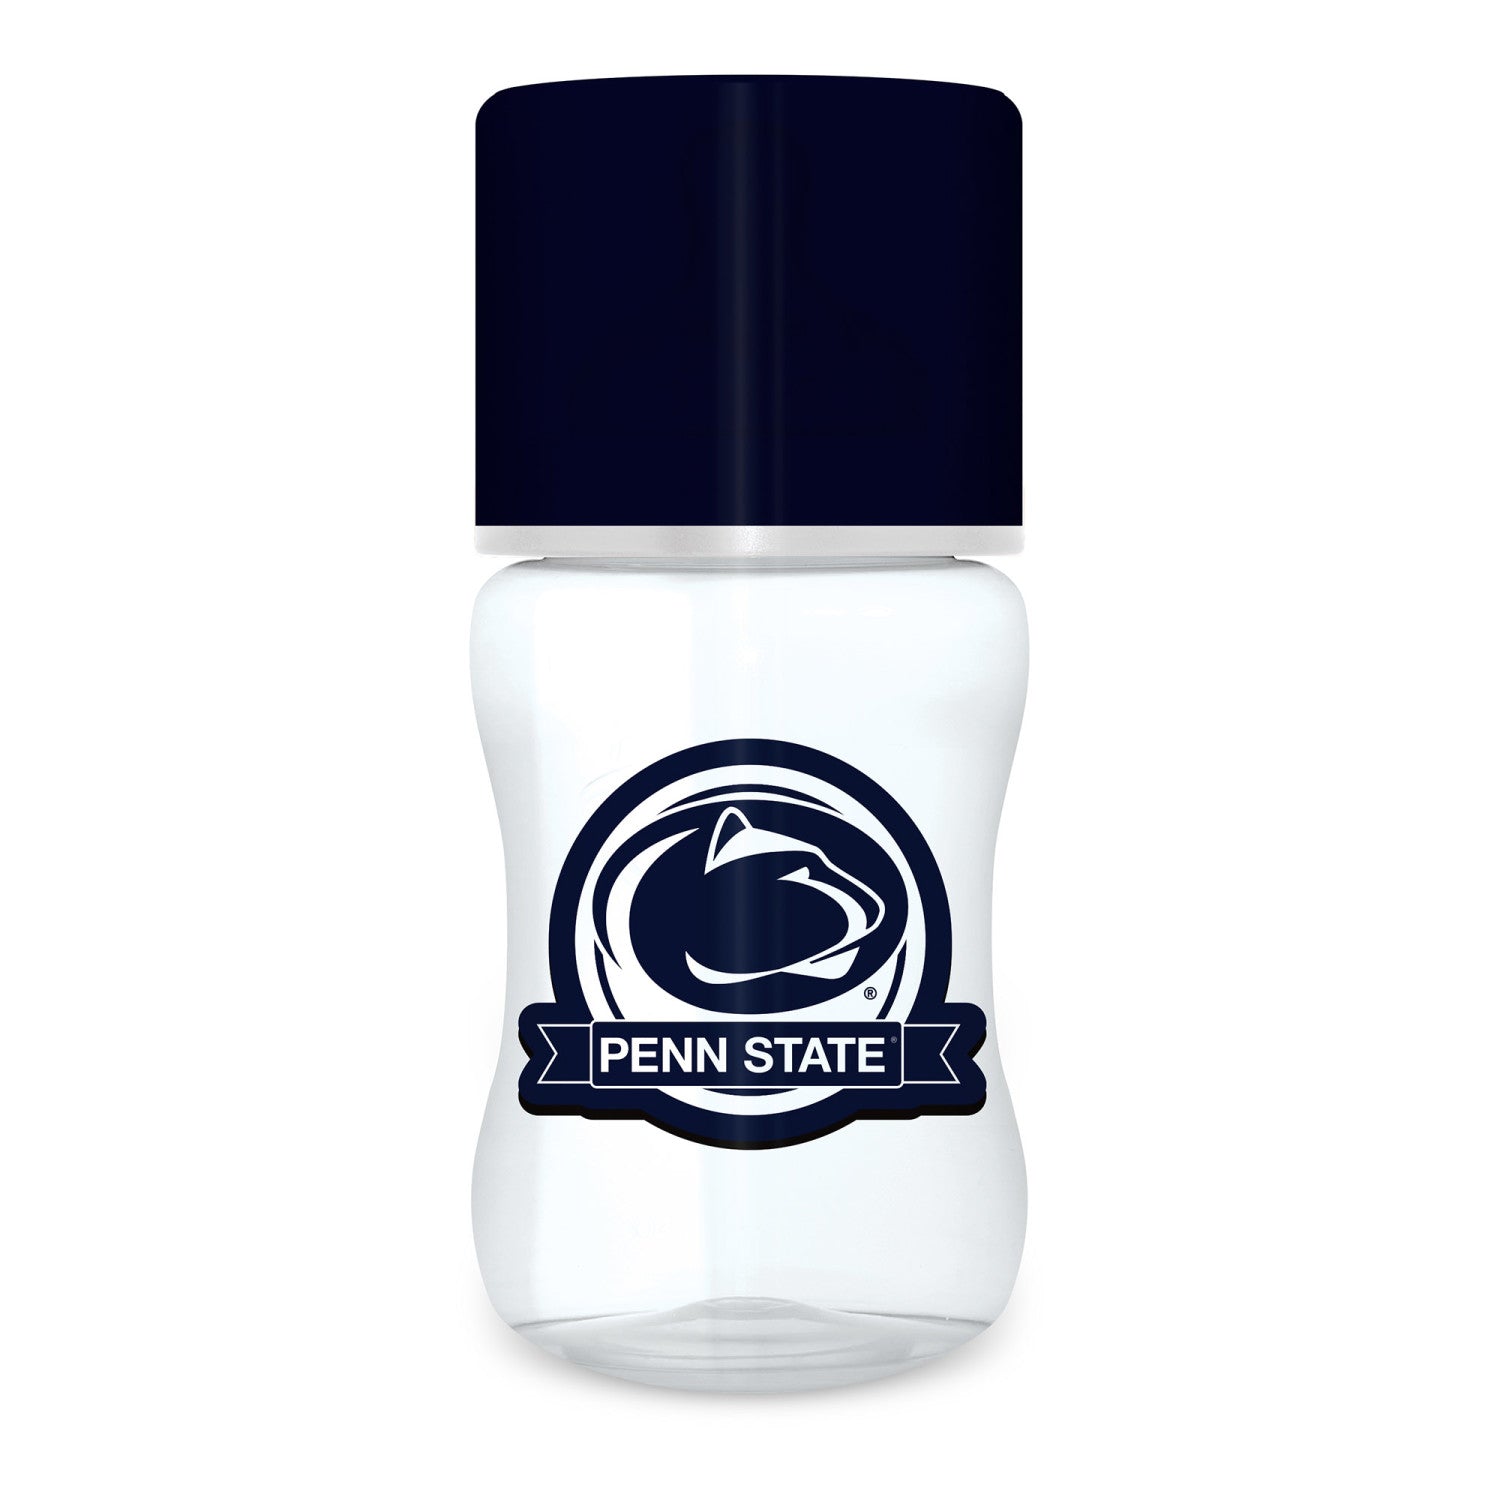 Penn State Nittany Lions - 3-Piece Baby Gift Set